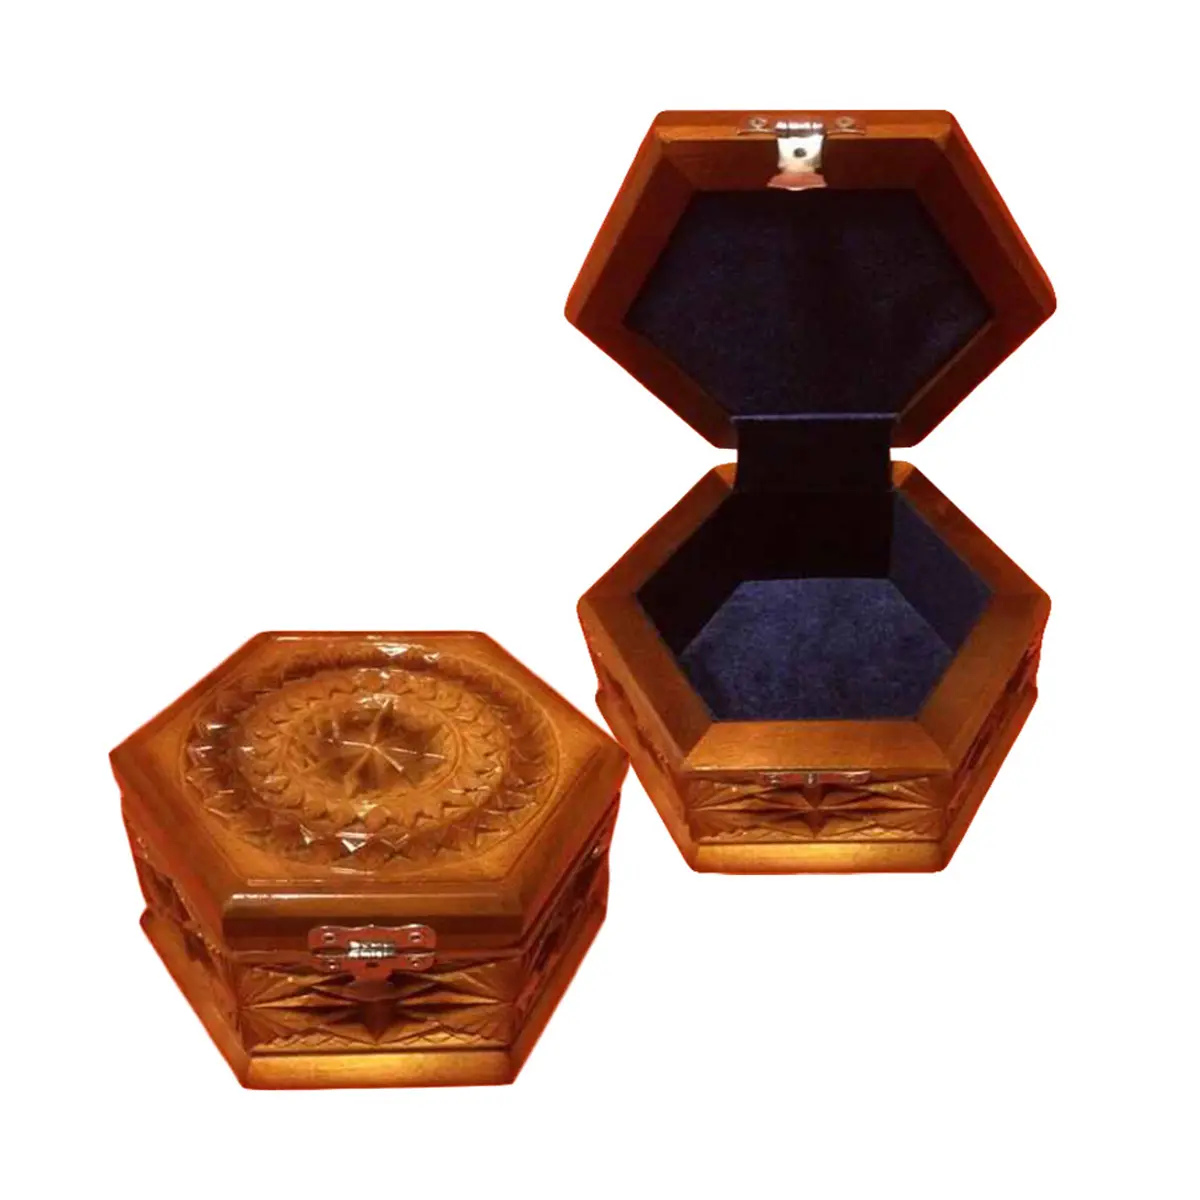 Elegant box - a beautiful and versatile gift made of fine wood for jewelry storage from natural materials